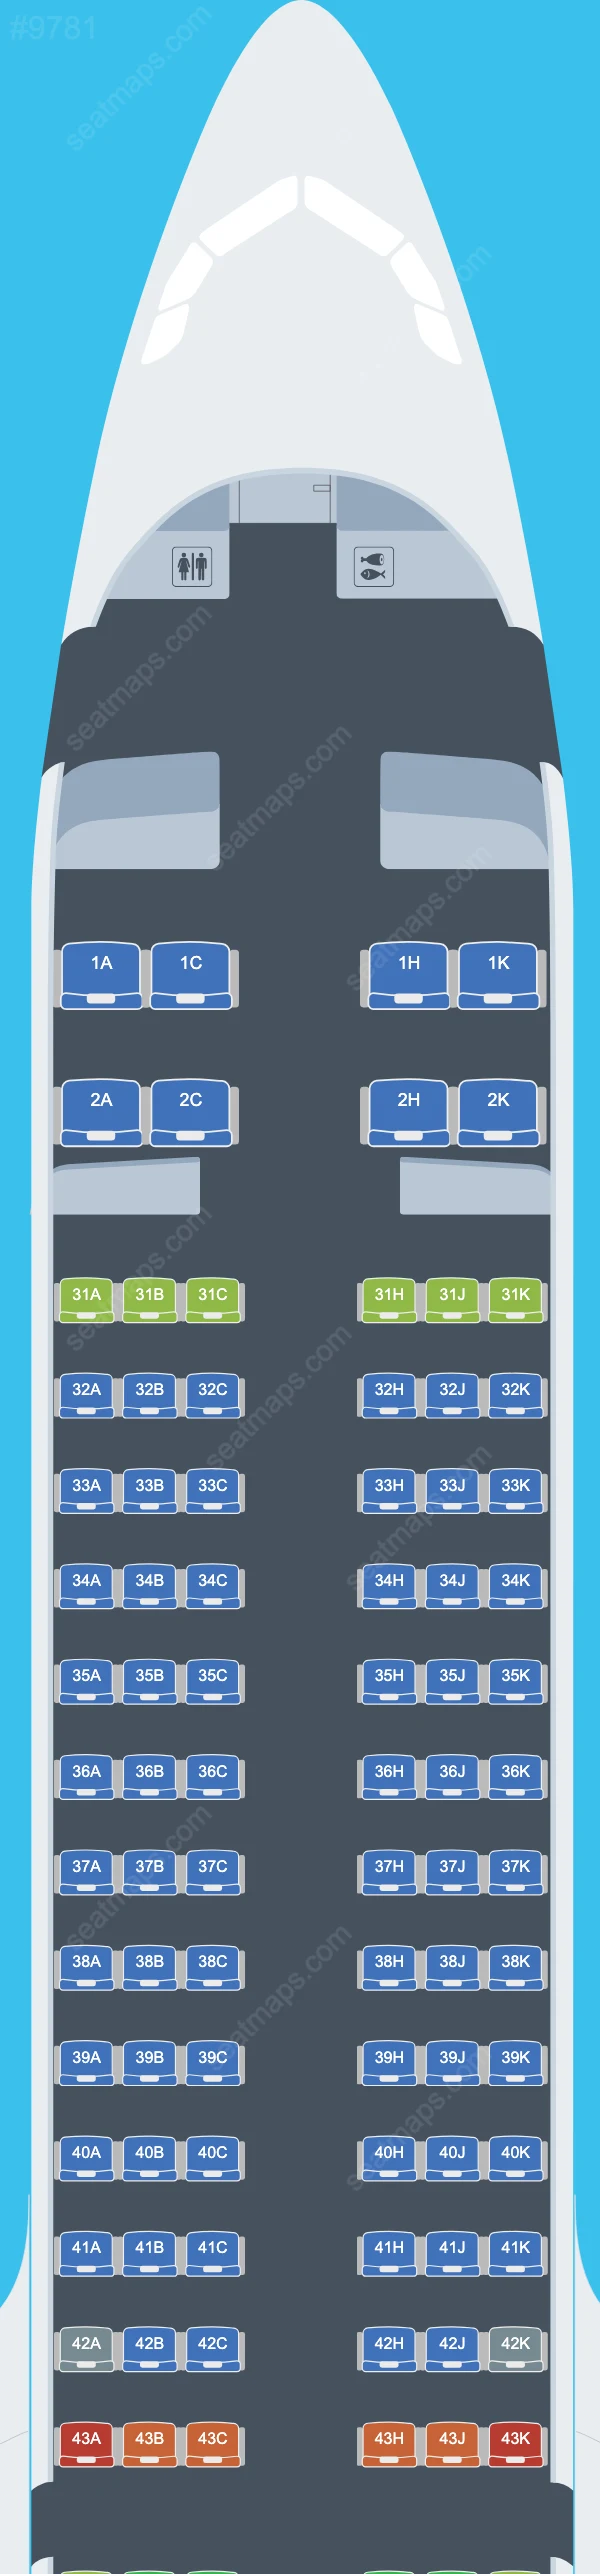 Juneyao Air Airbus A321 Seat Maps A321-200neo